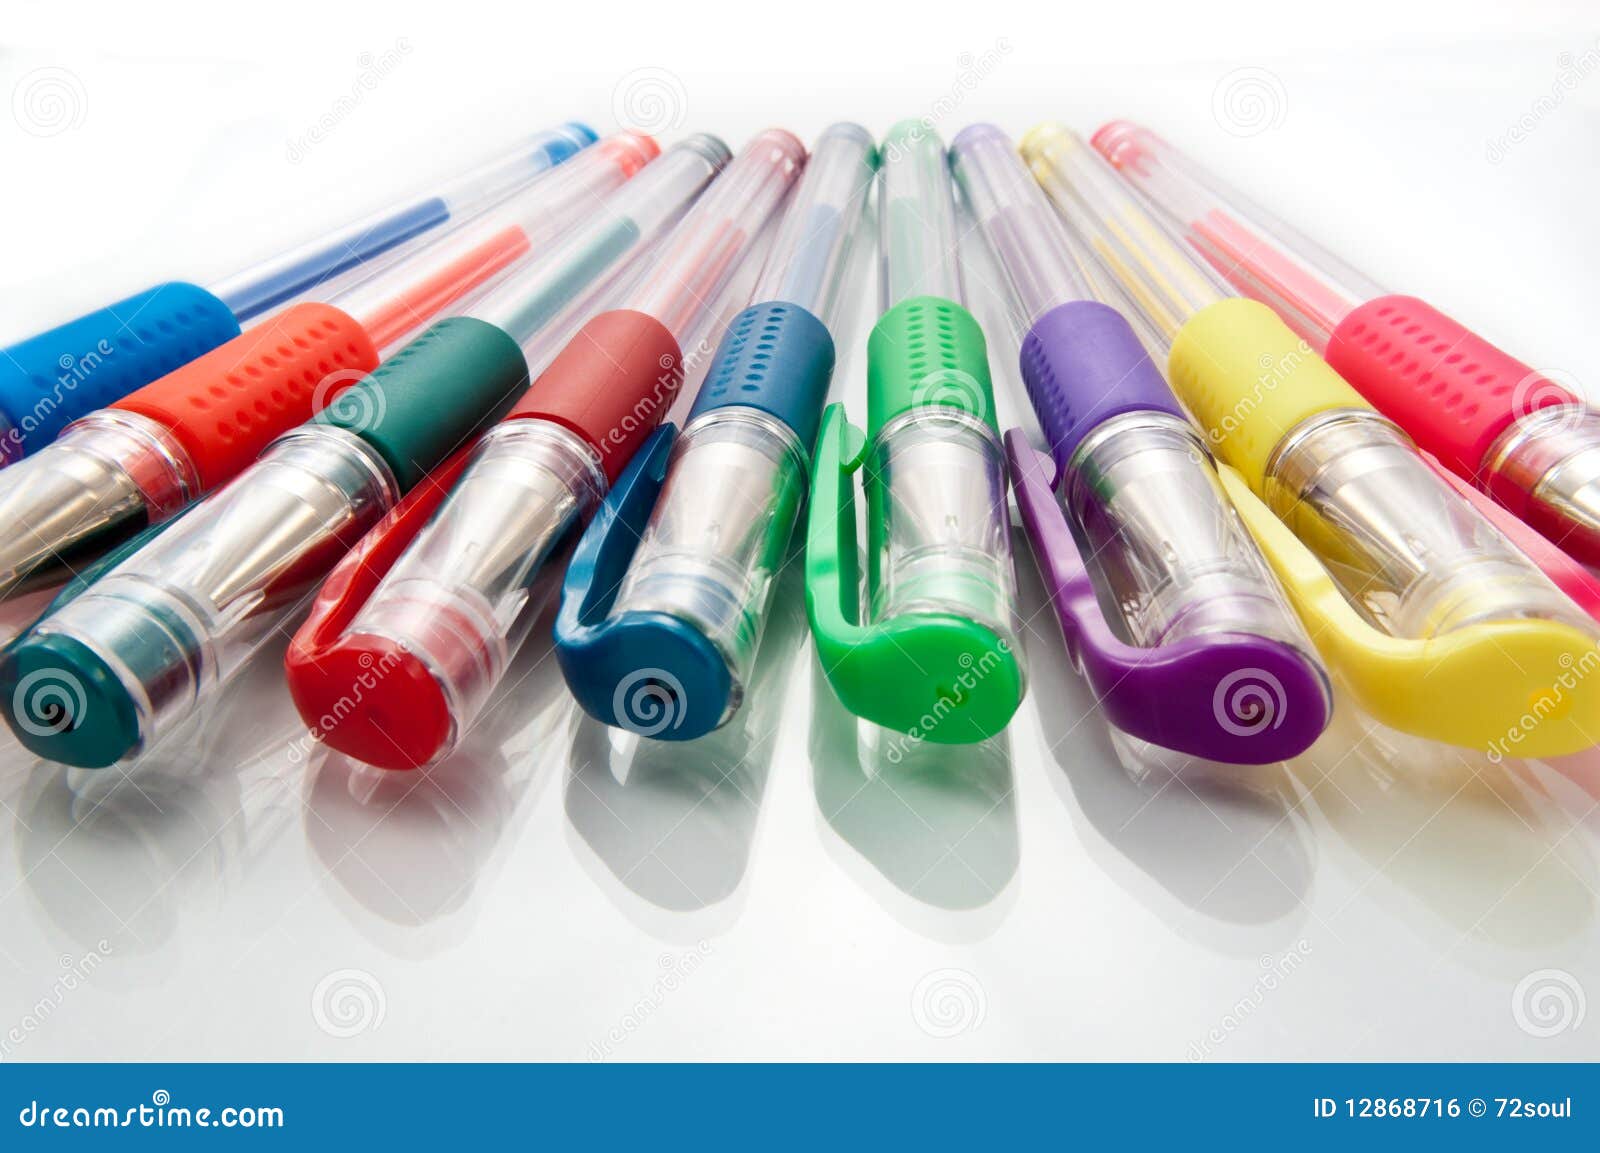 Colored Gel Pens Carousel Of Colored Pens Colored Gel Pen Tips Stock Photo  - Download Image Now - iStock